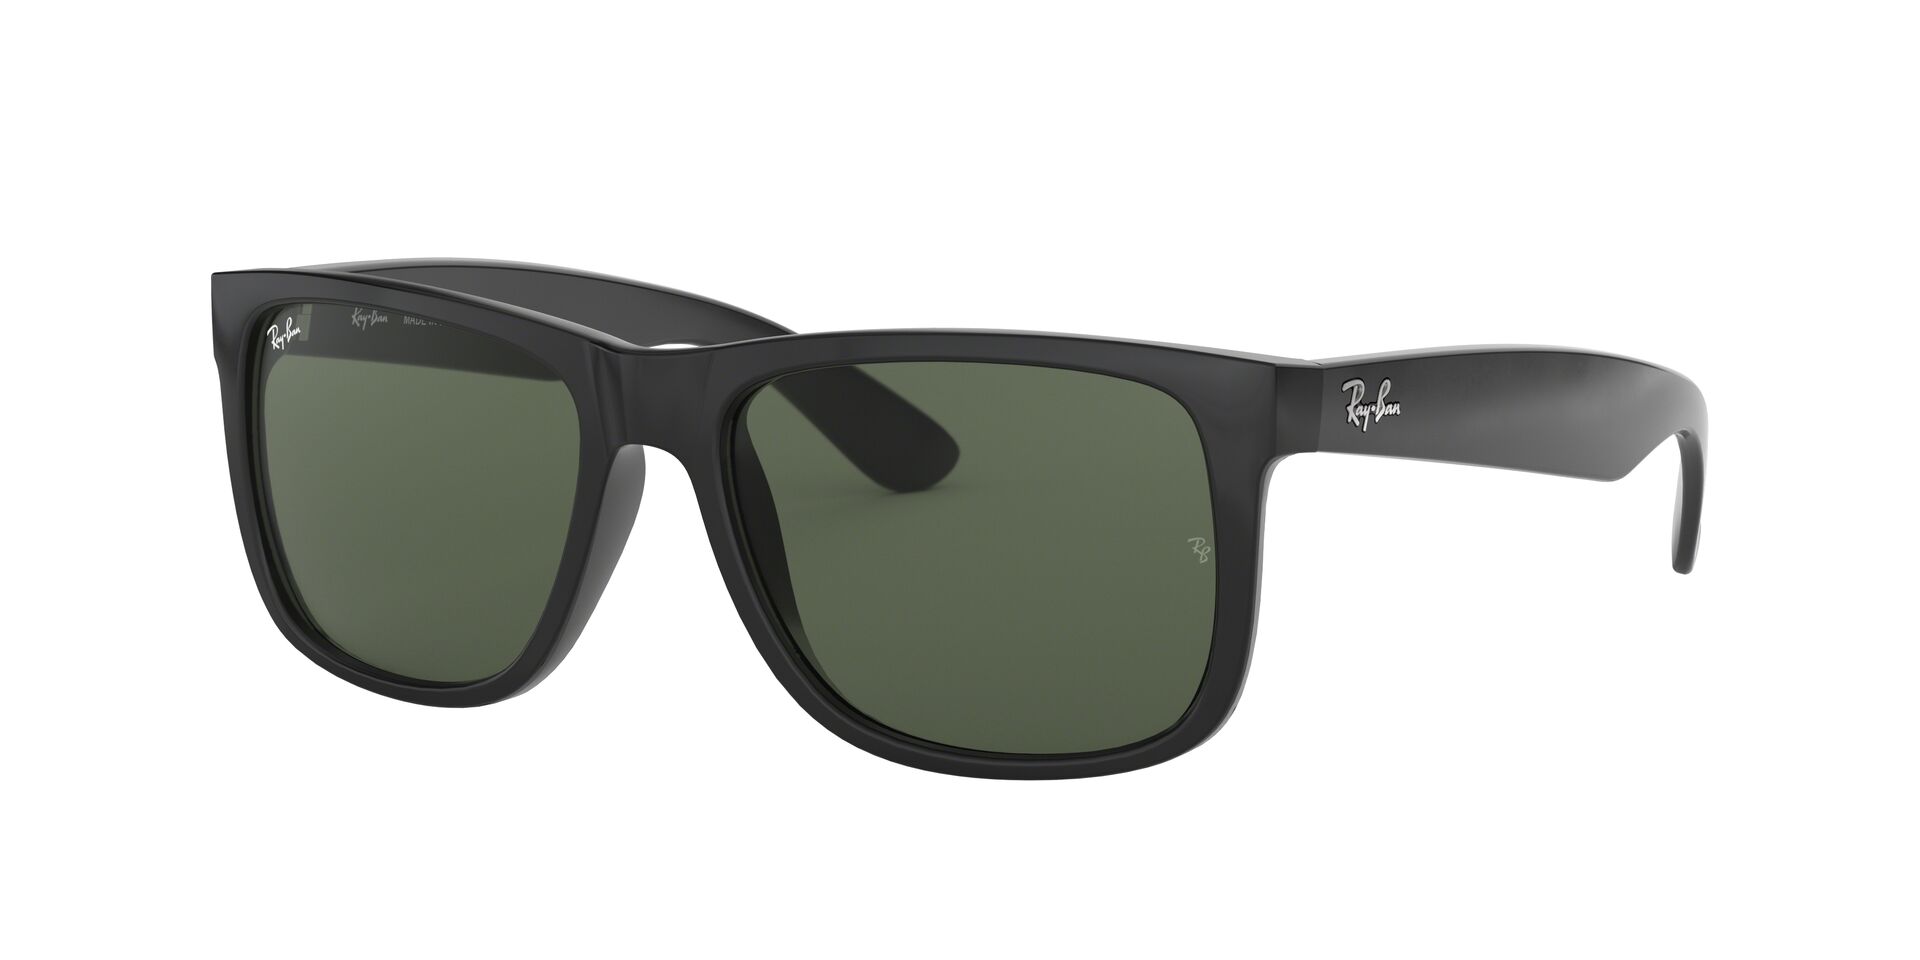 Buy Ray-Ban Justin Collection Sunglasses Online.